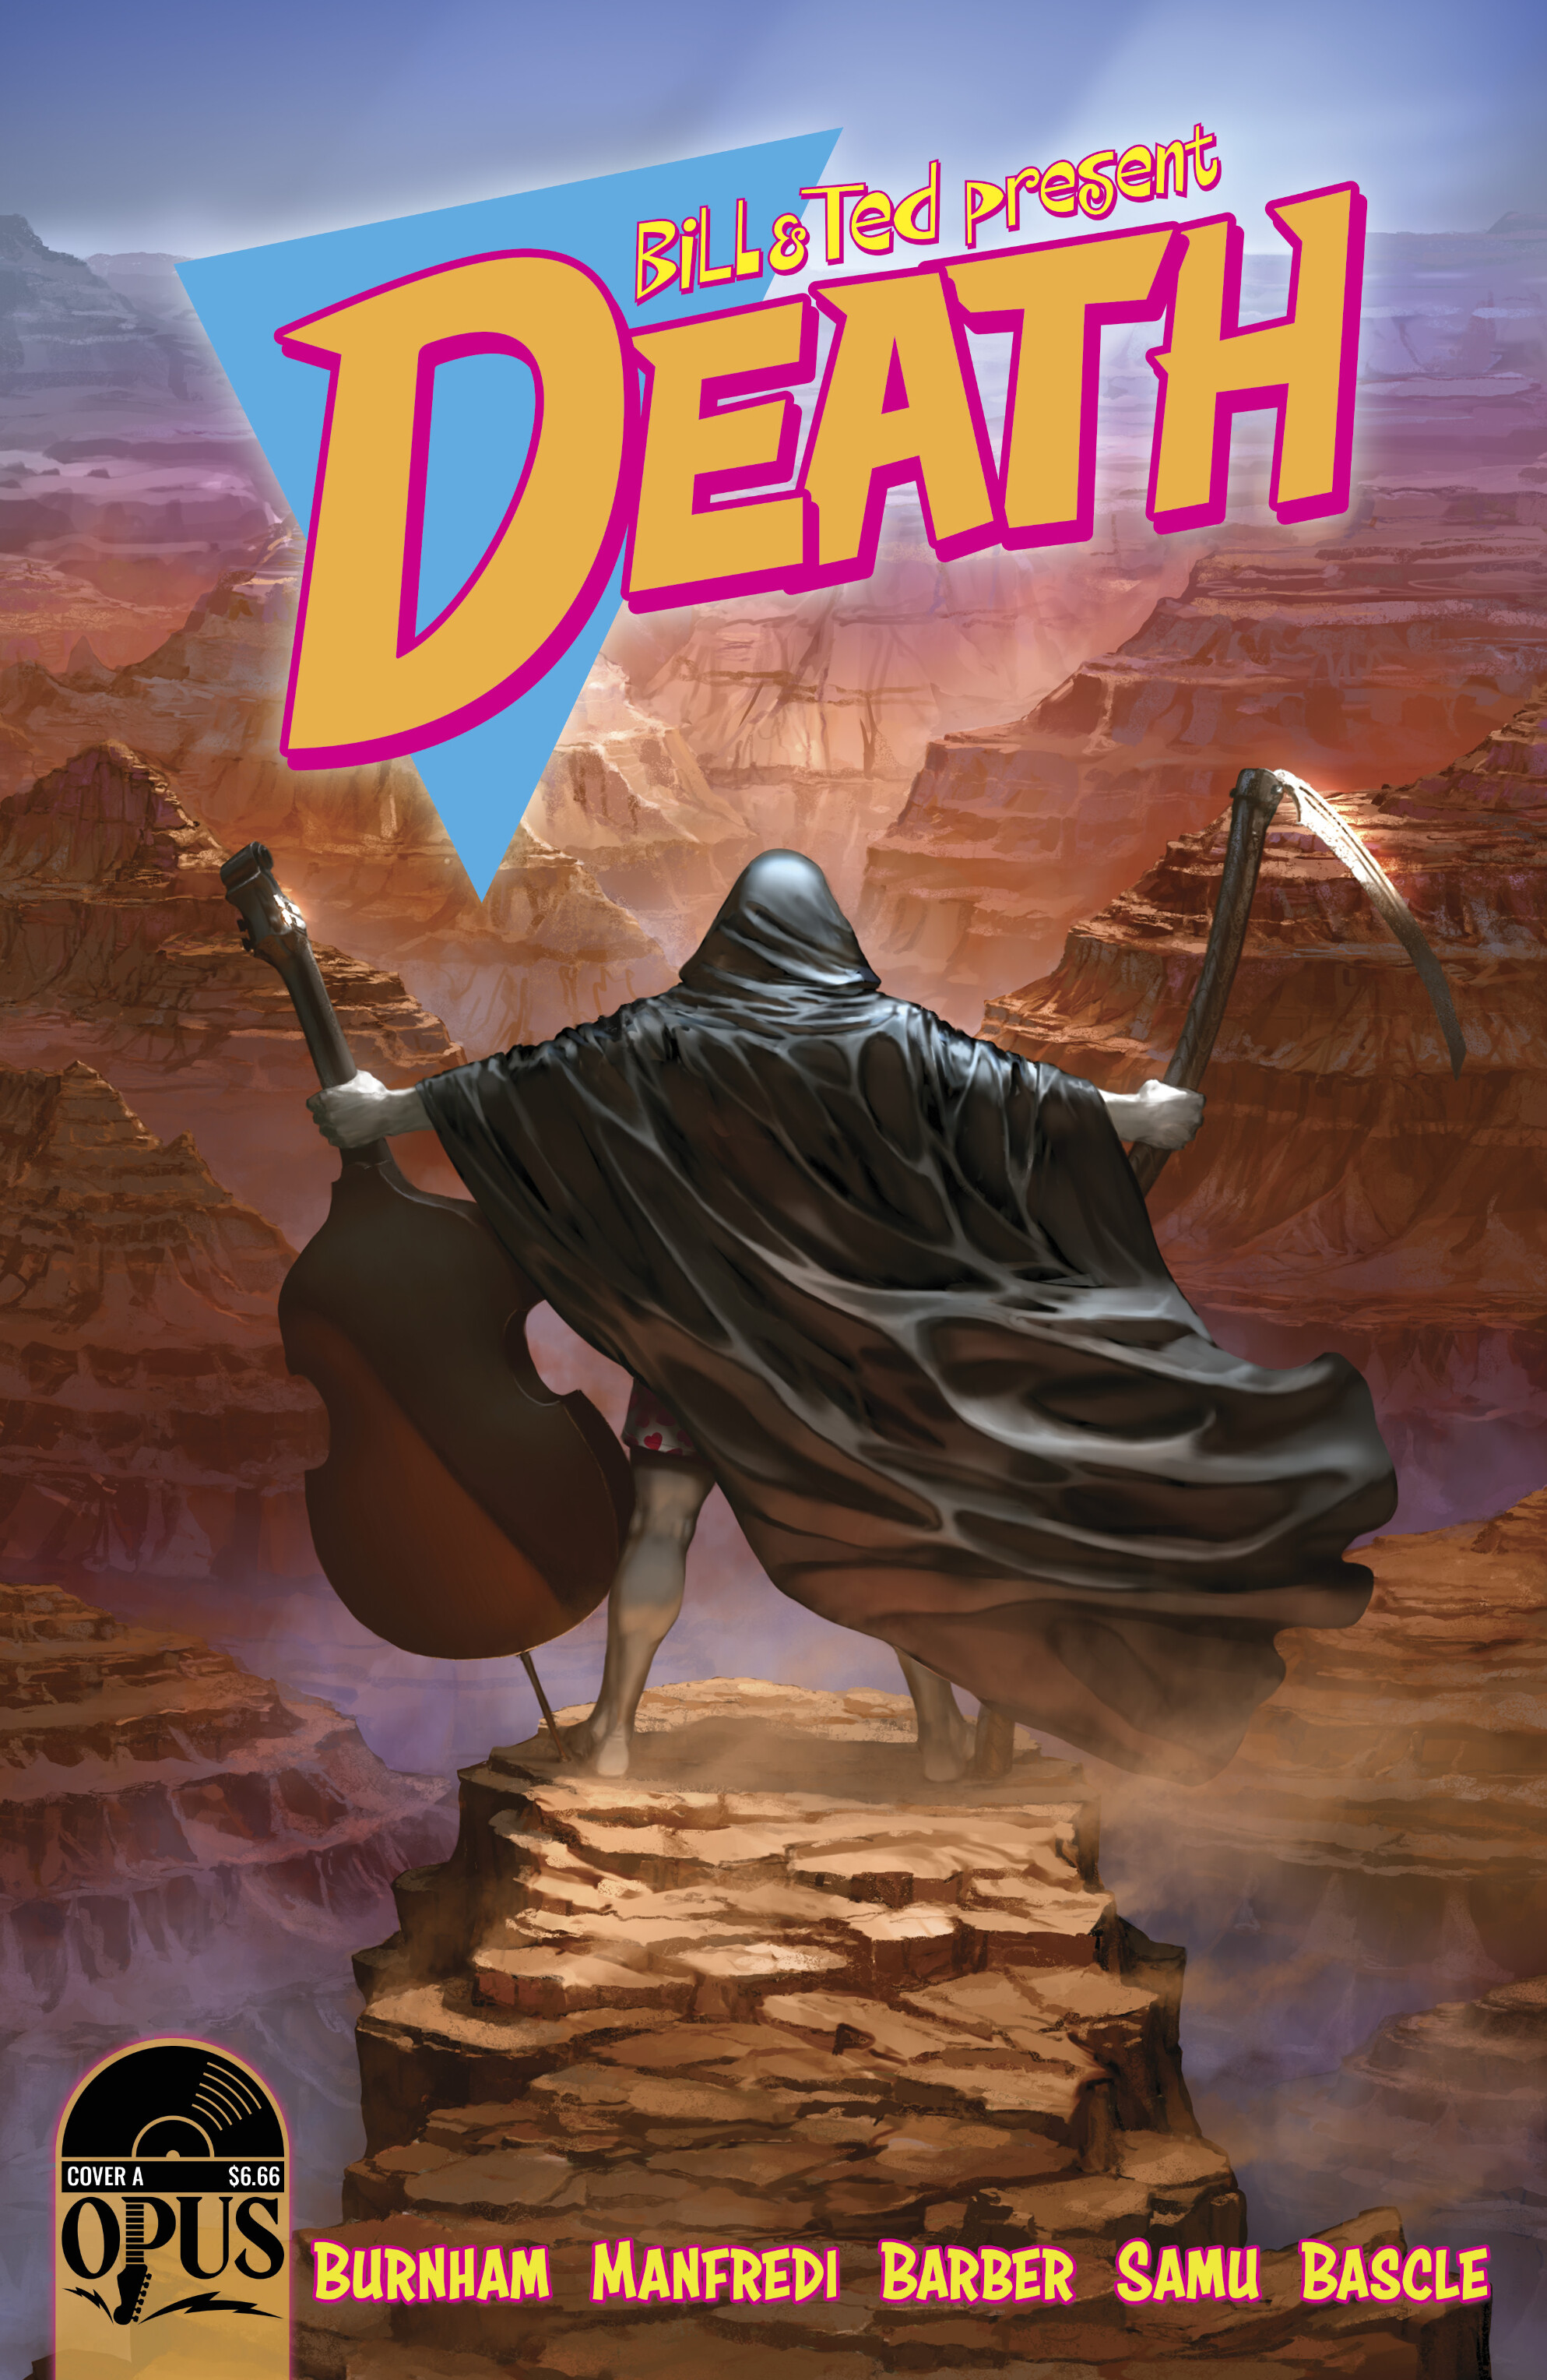 Read online Bill & Ted Present Death comic -  Issue # Full - 1